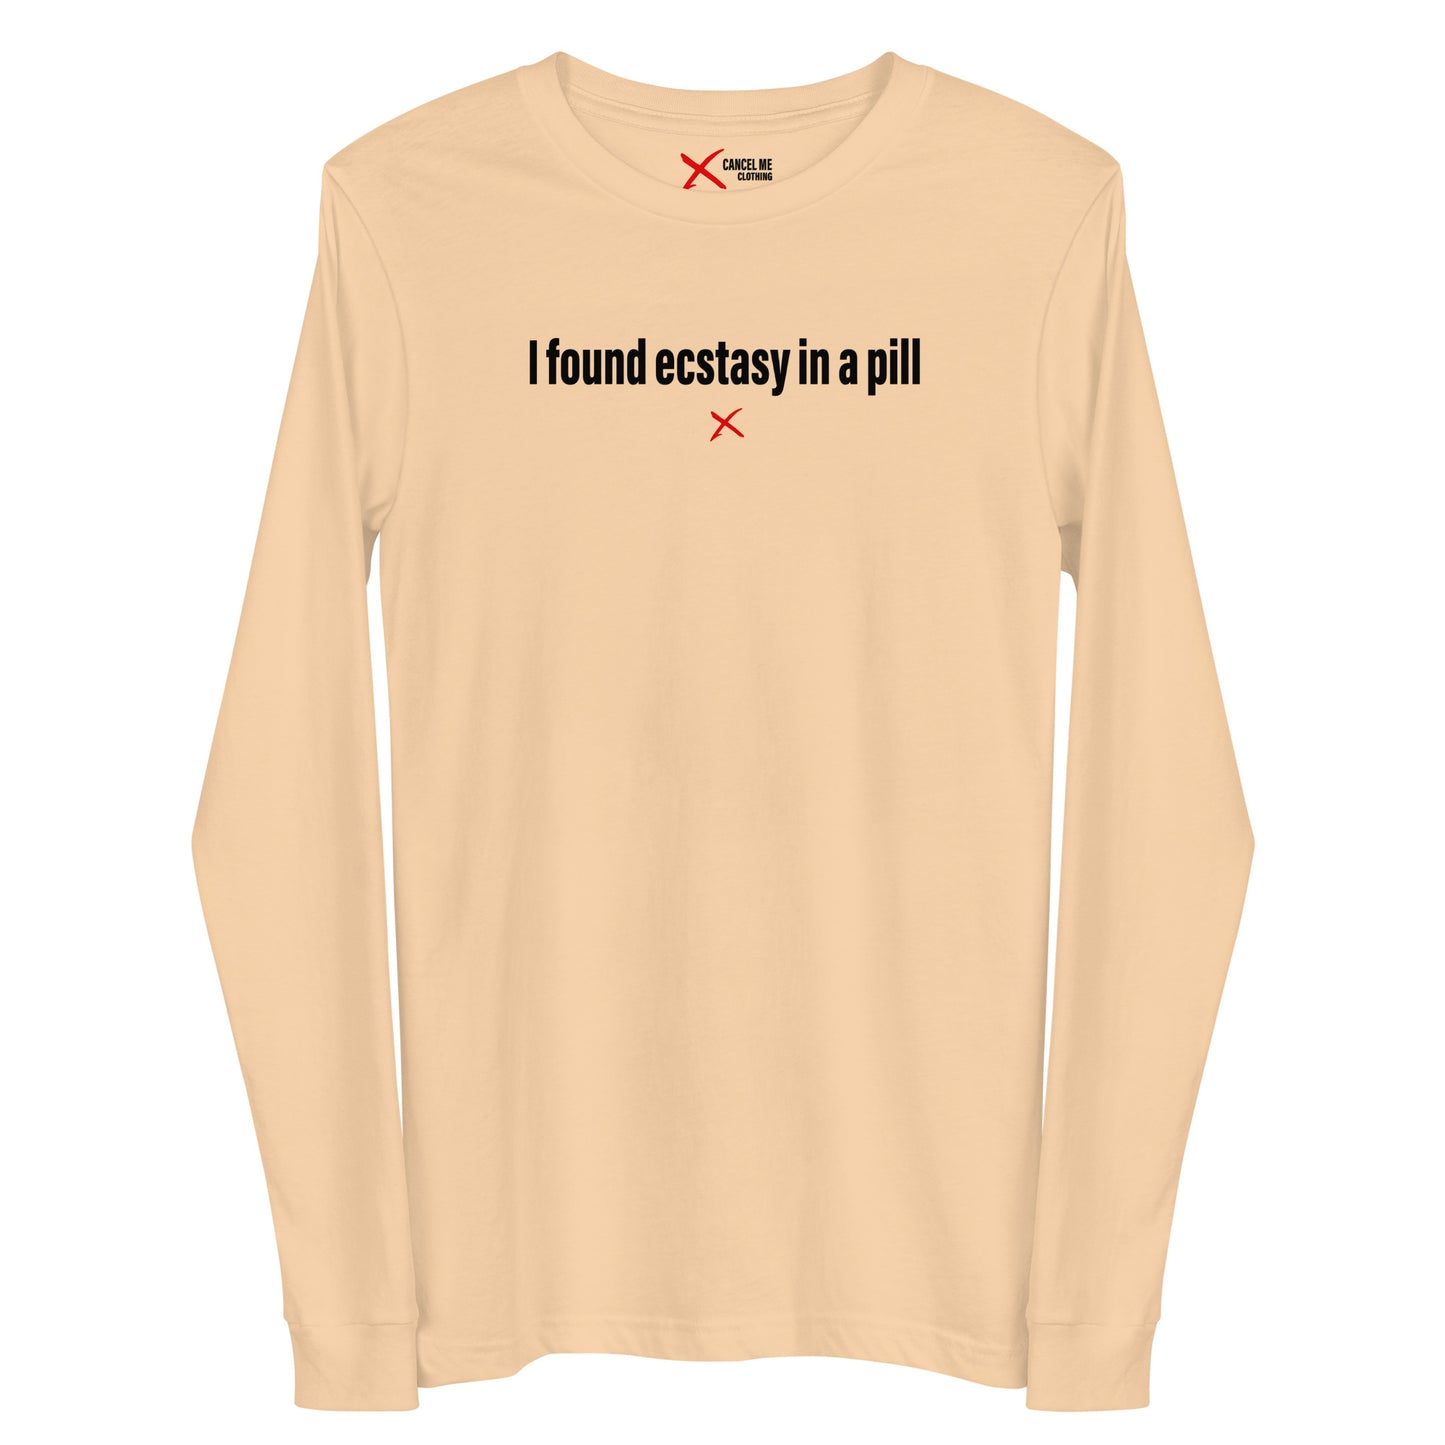 I found ecstasy in a pill - Longsleeve